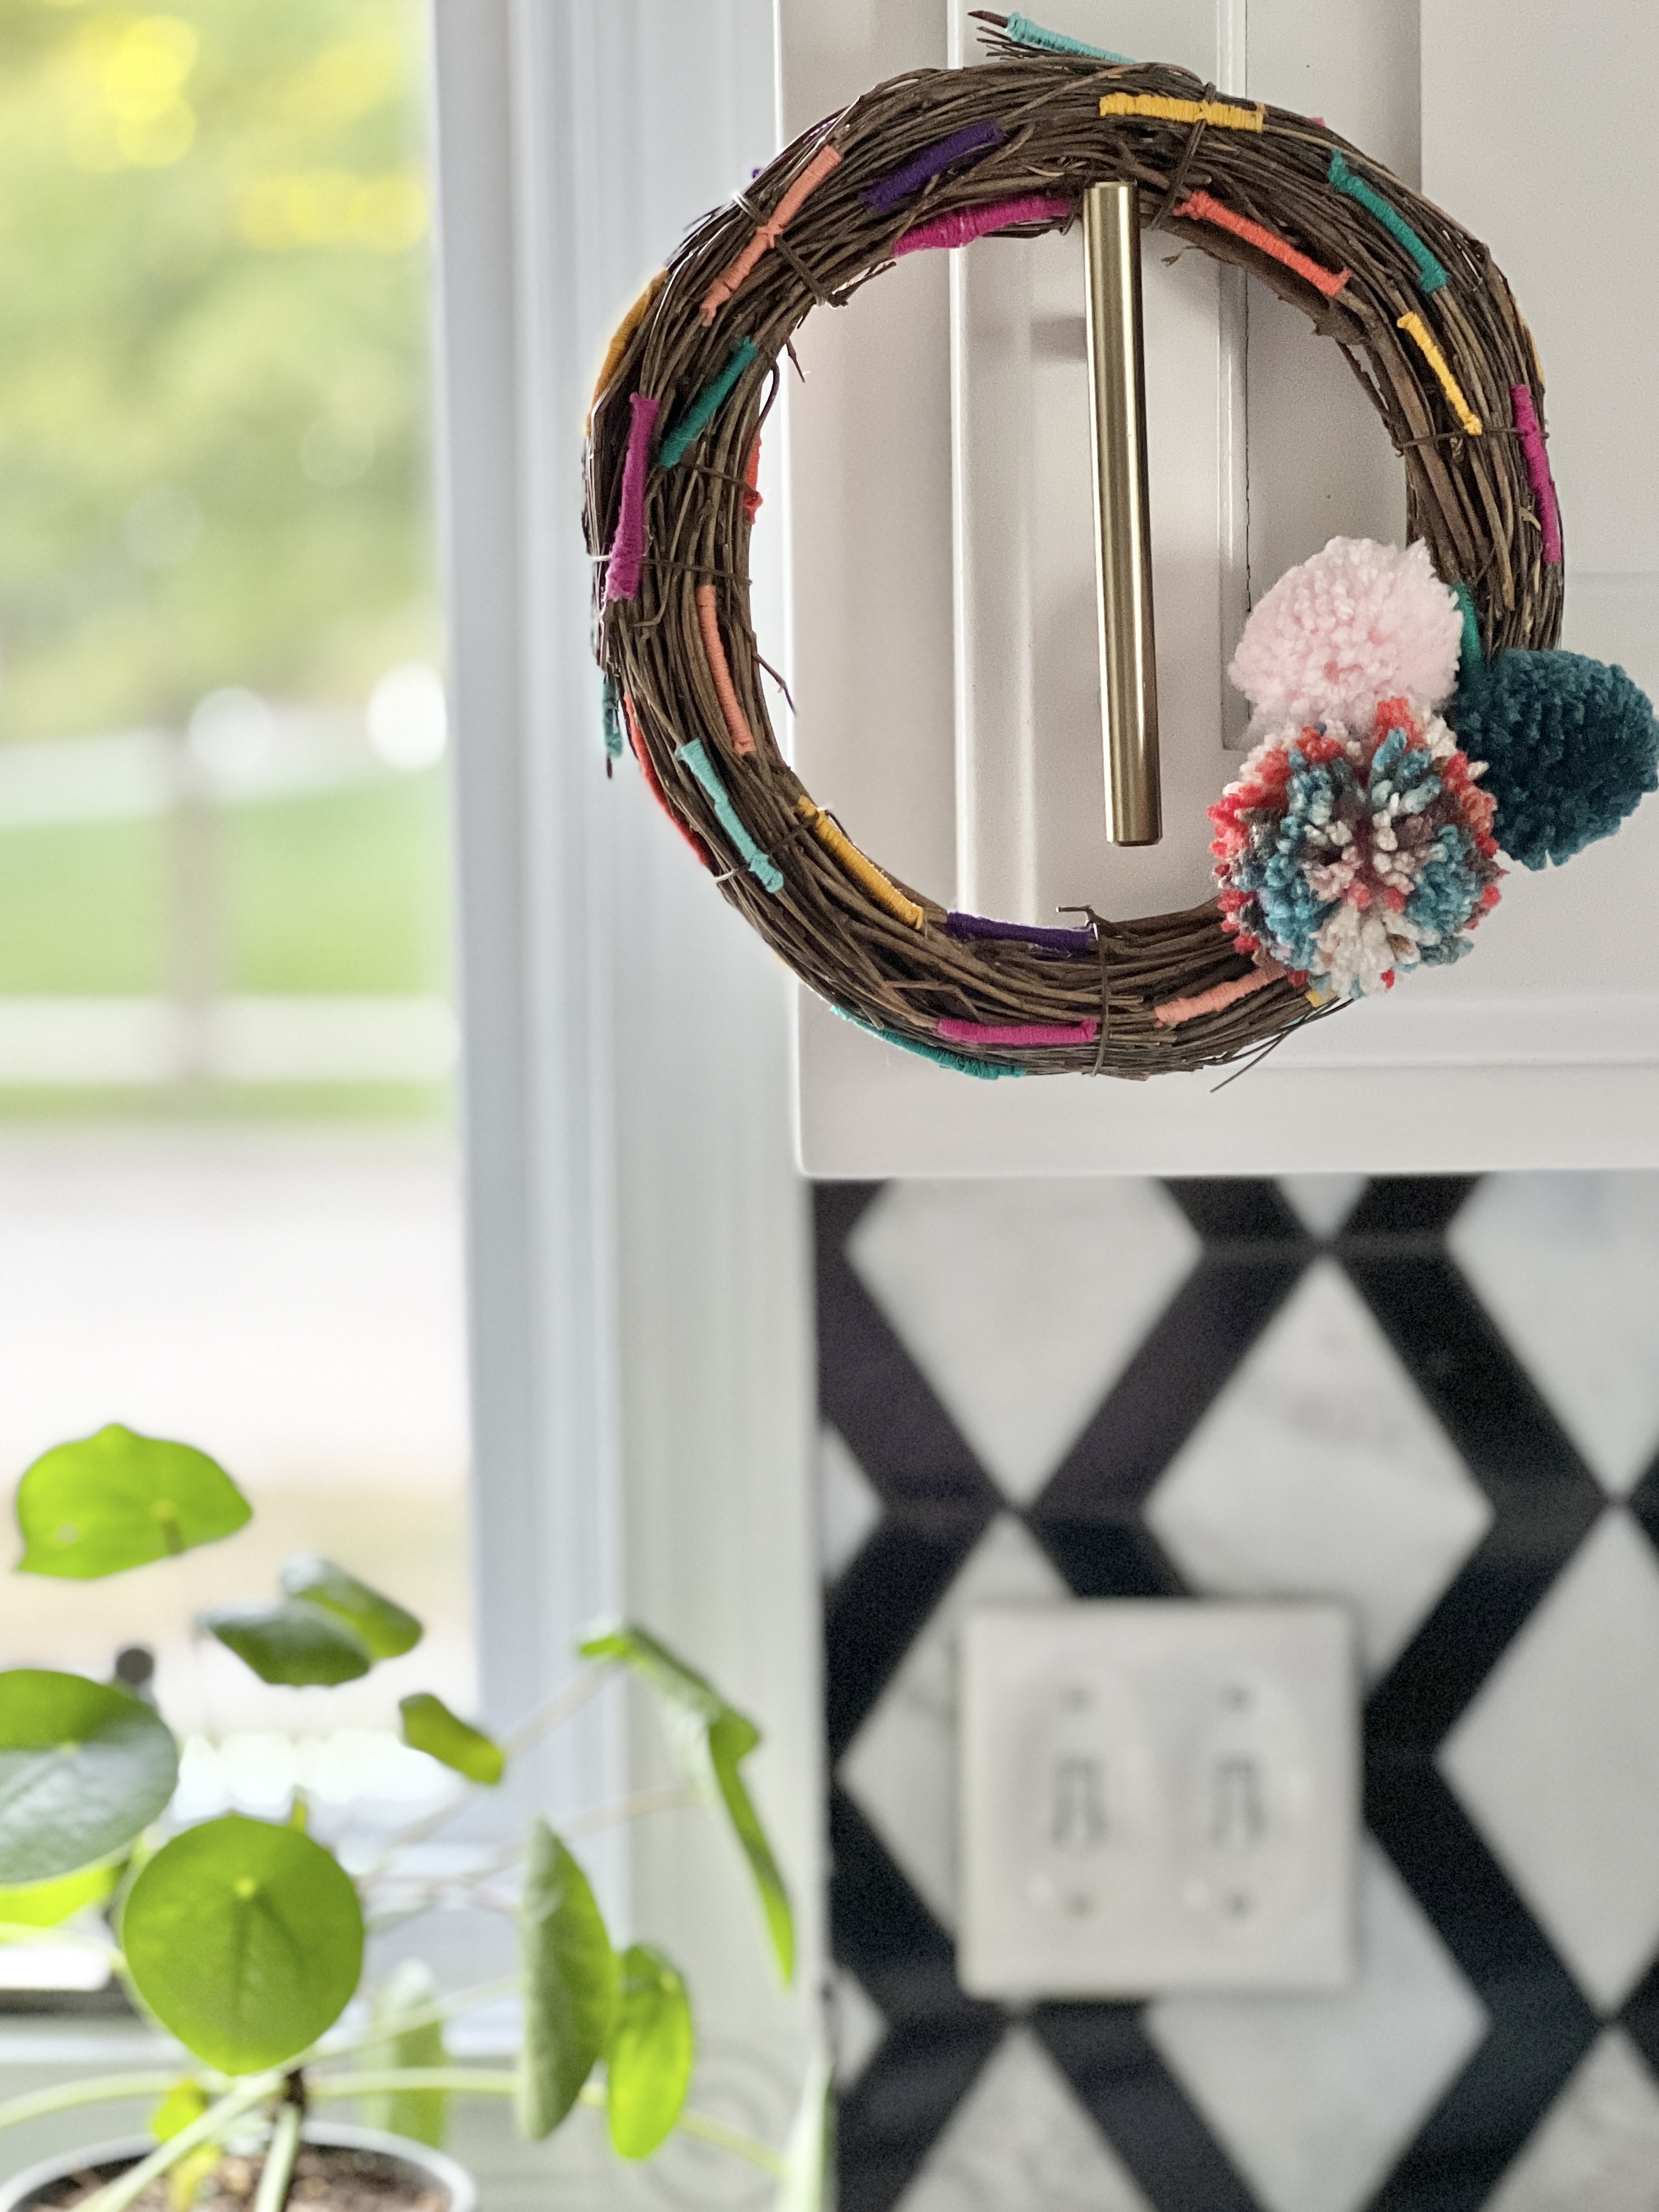 Grapevine wreath hanging from cabinet hardware.